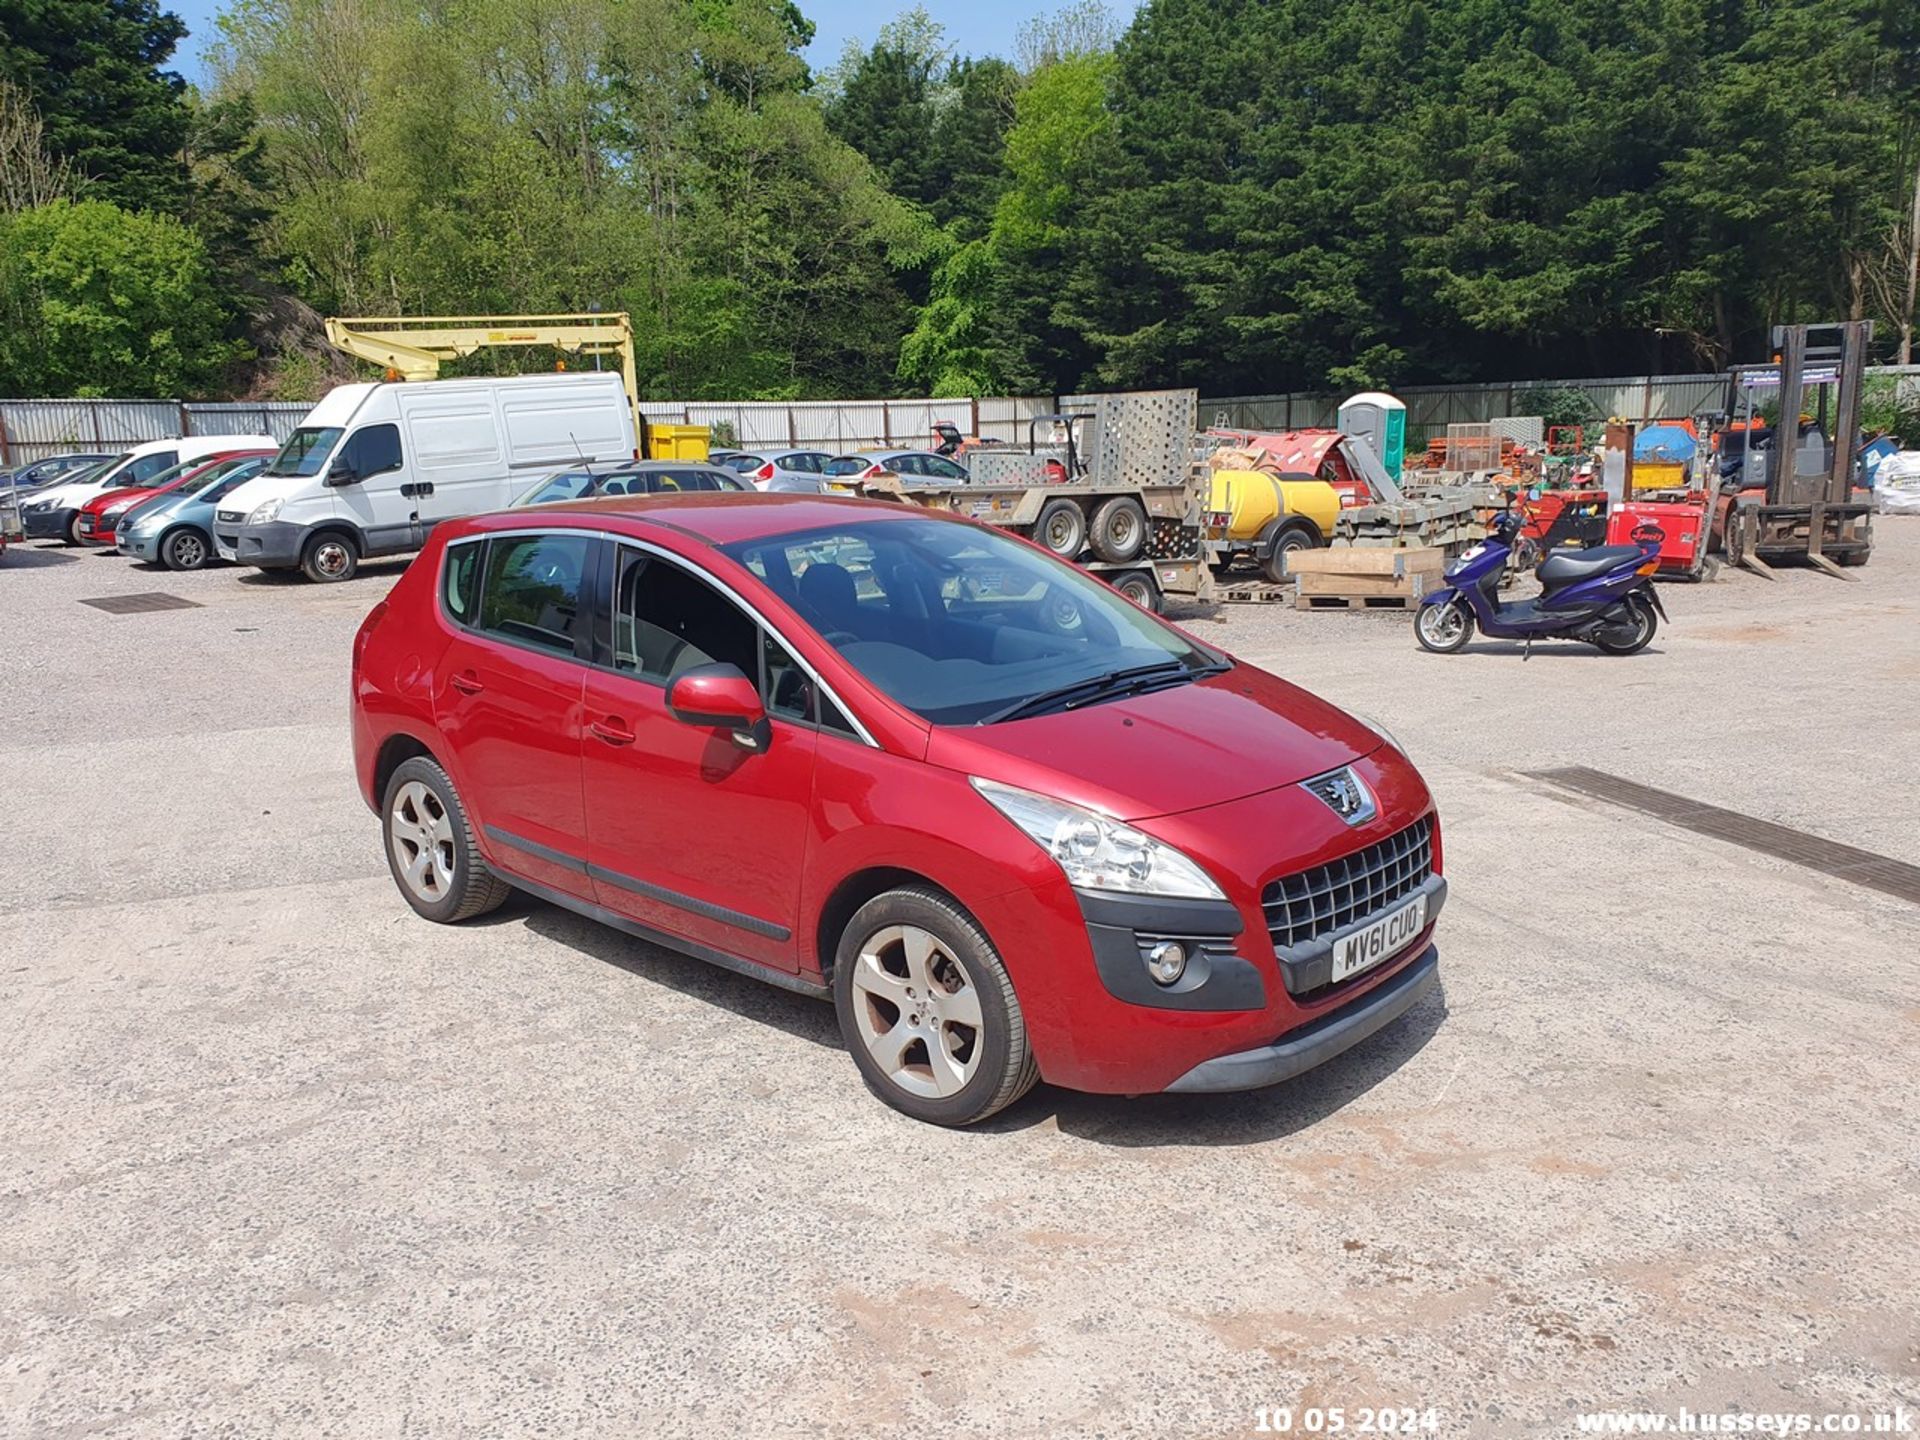 11/61 PEUGEOT 3008 SPORT E-HDI S-A - 1560cc 5dr Hatchback (Red, 89k) - Image 5 of 49